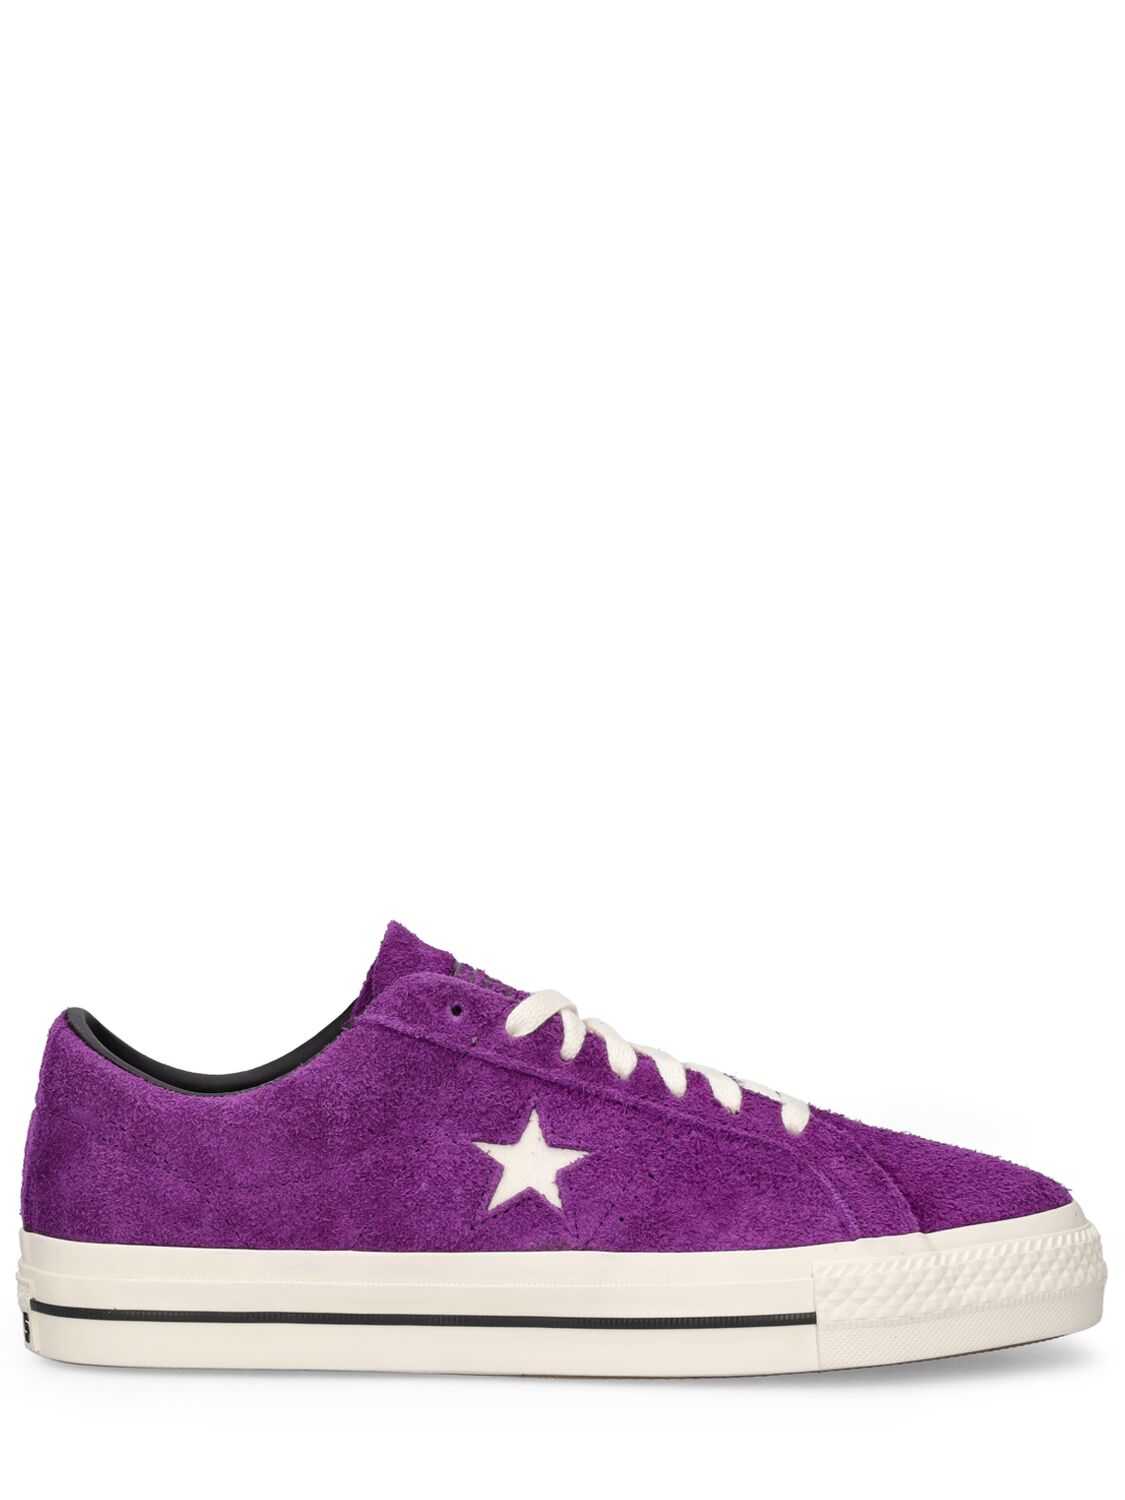 CONVERSE ONE STAR PRO SNEAKERS